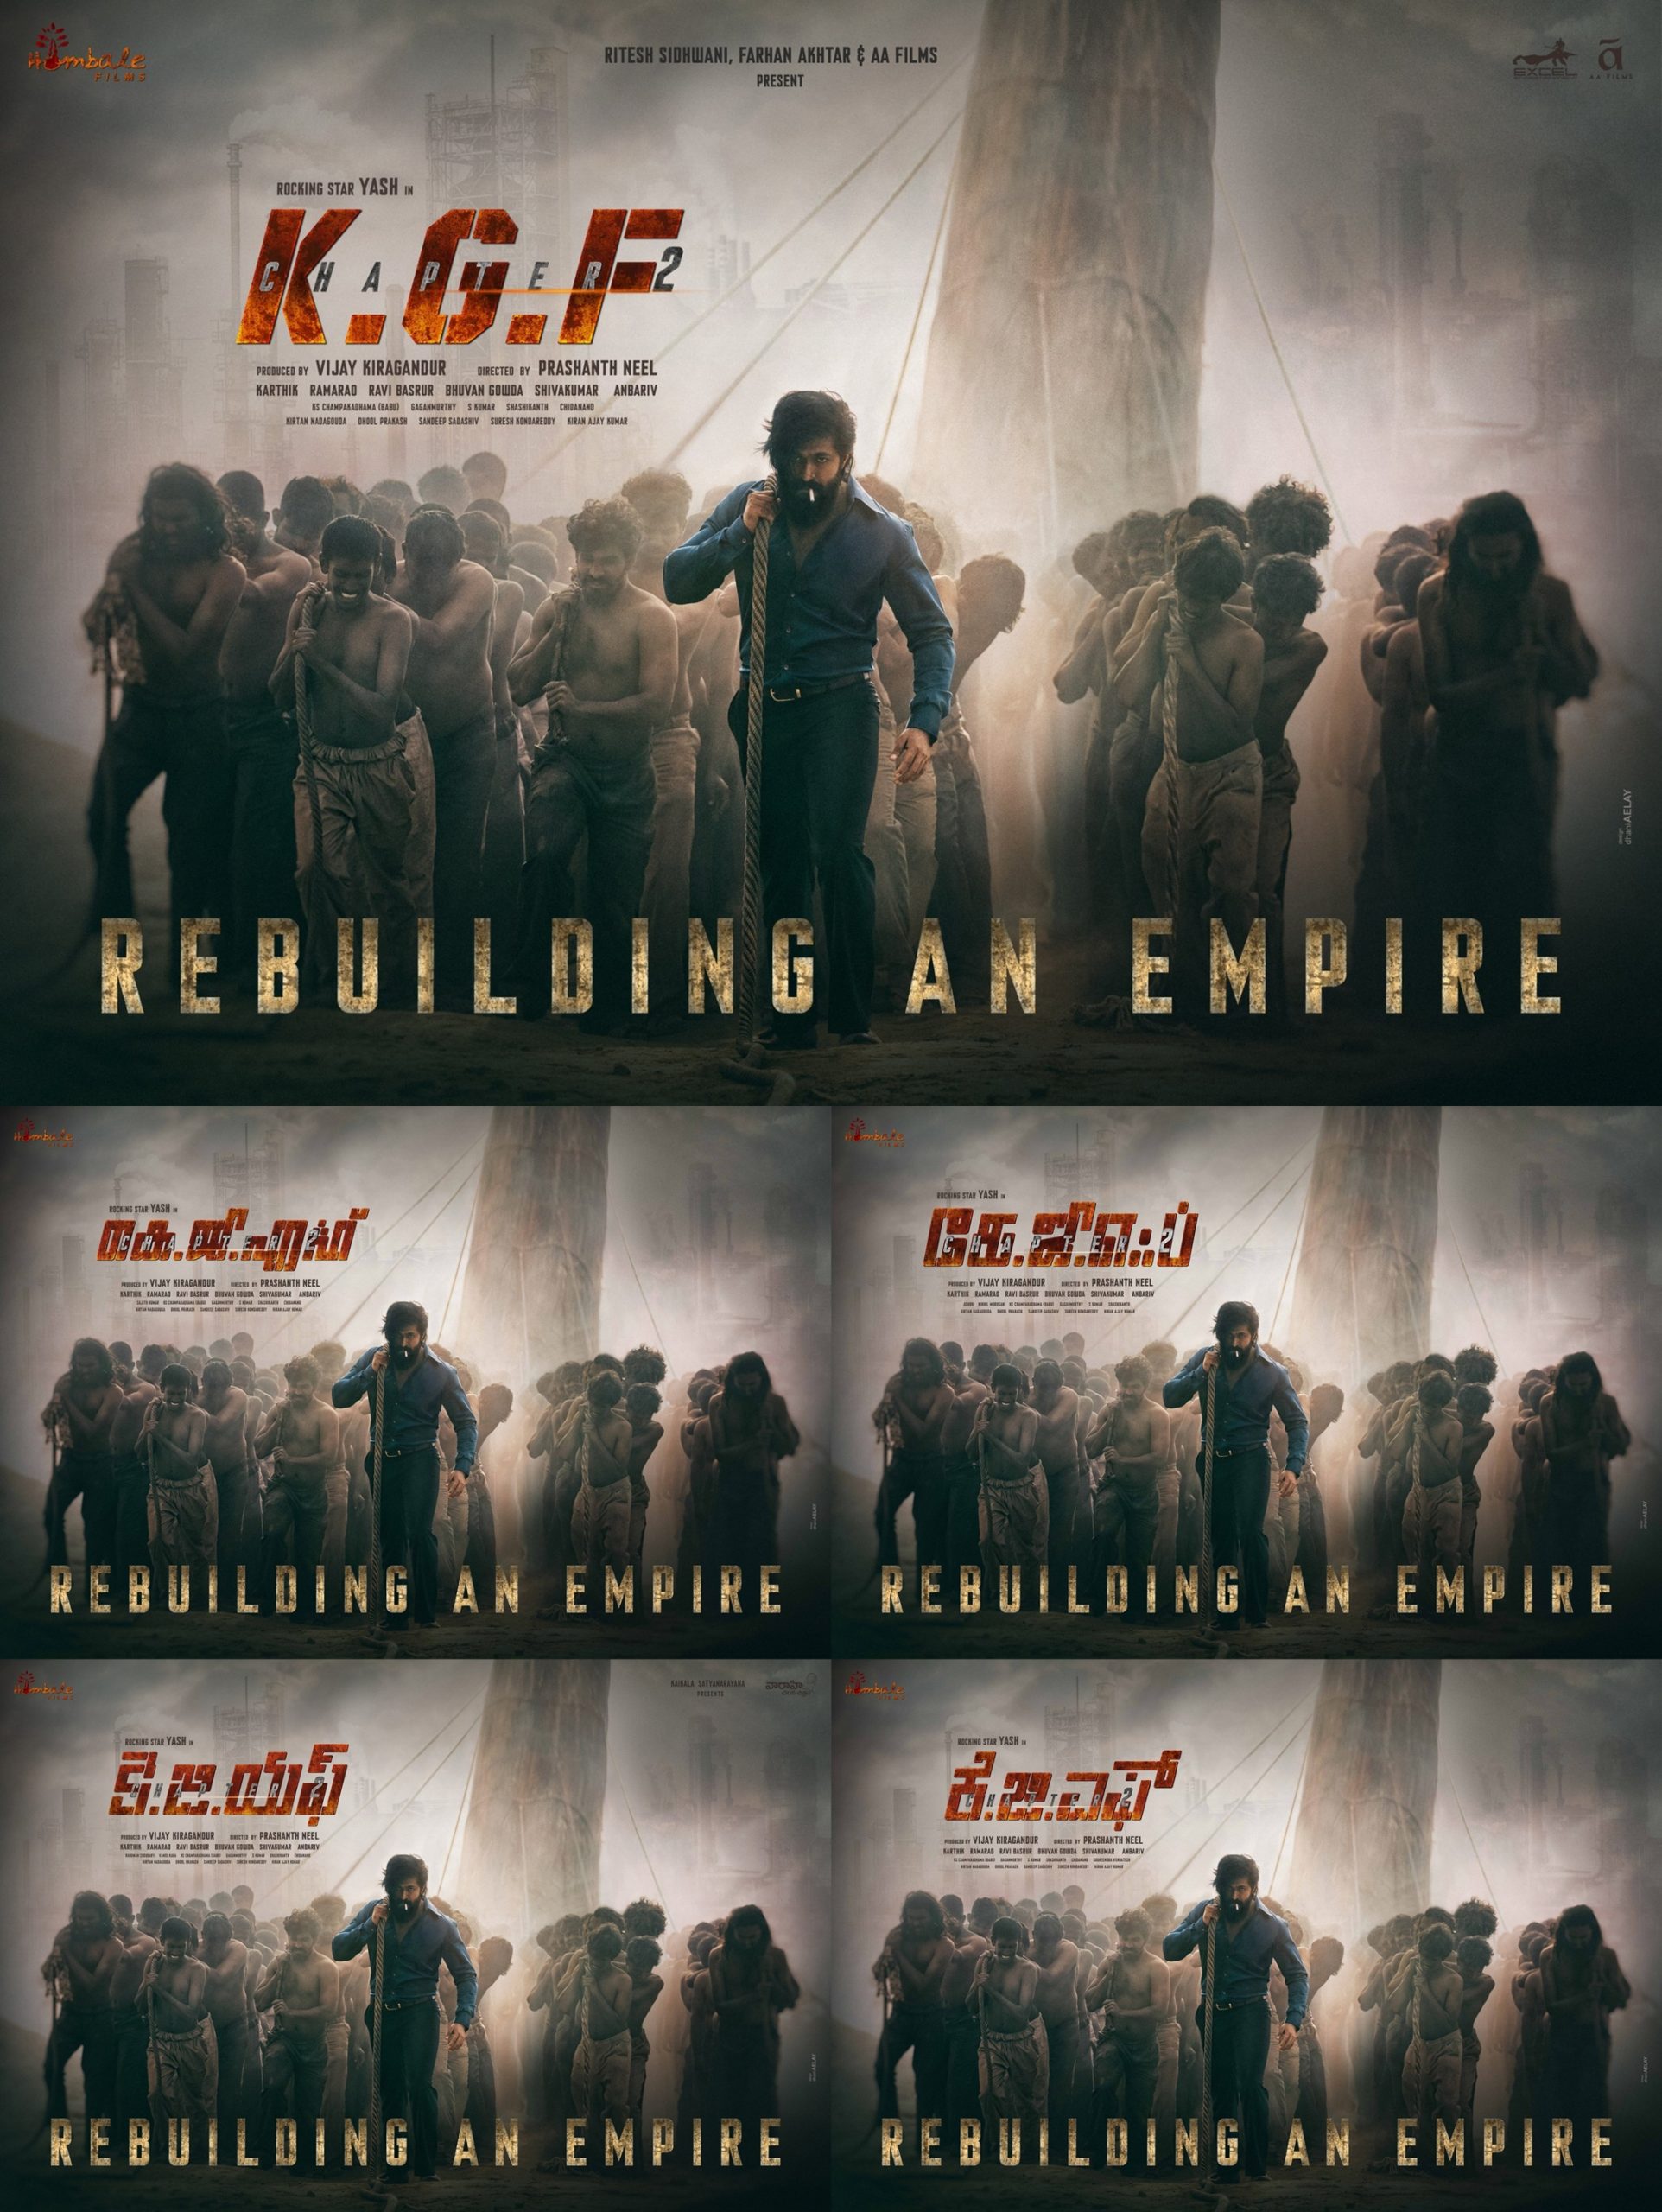 Kgf Chapter 2 First Look Unveiled With Rebuilding An Empire